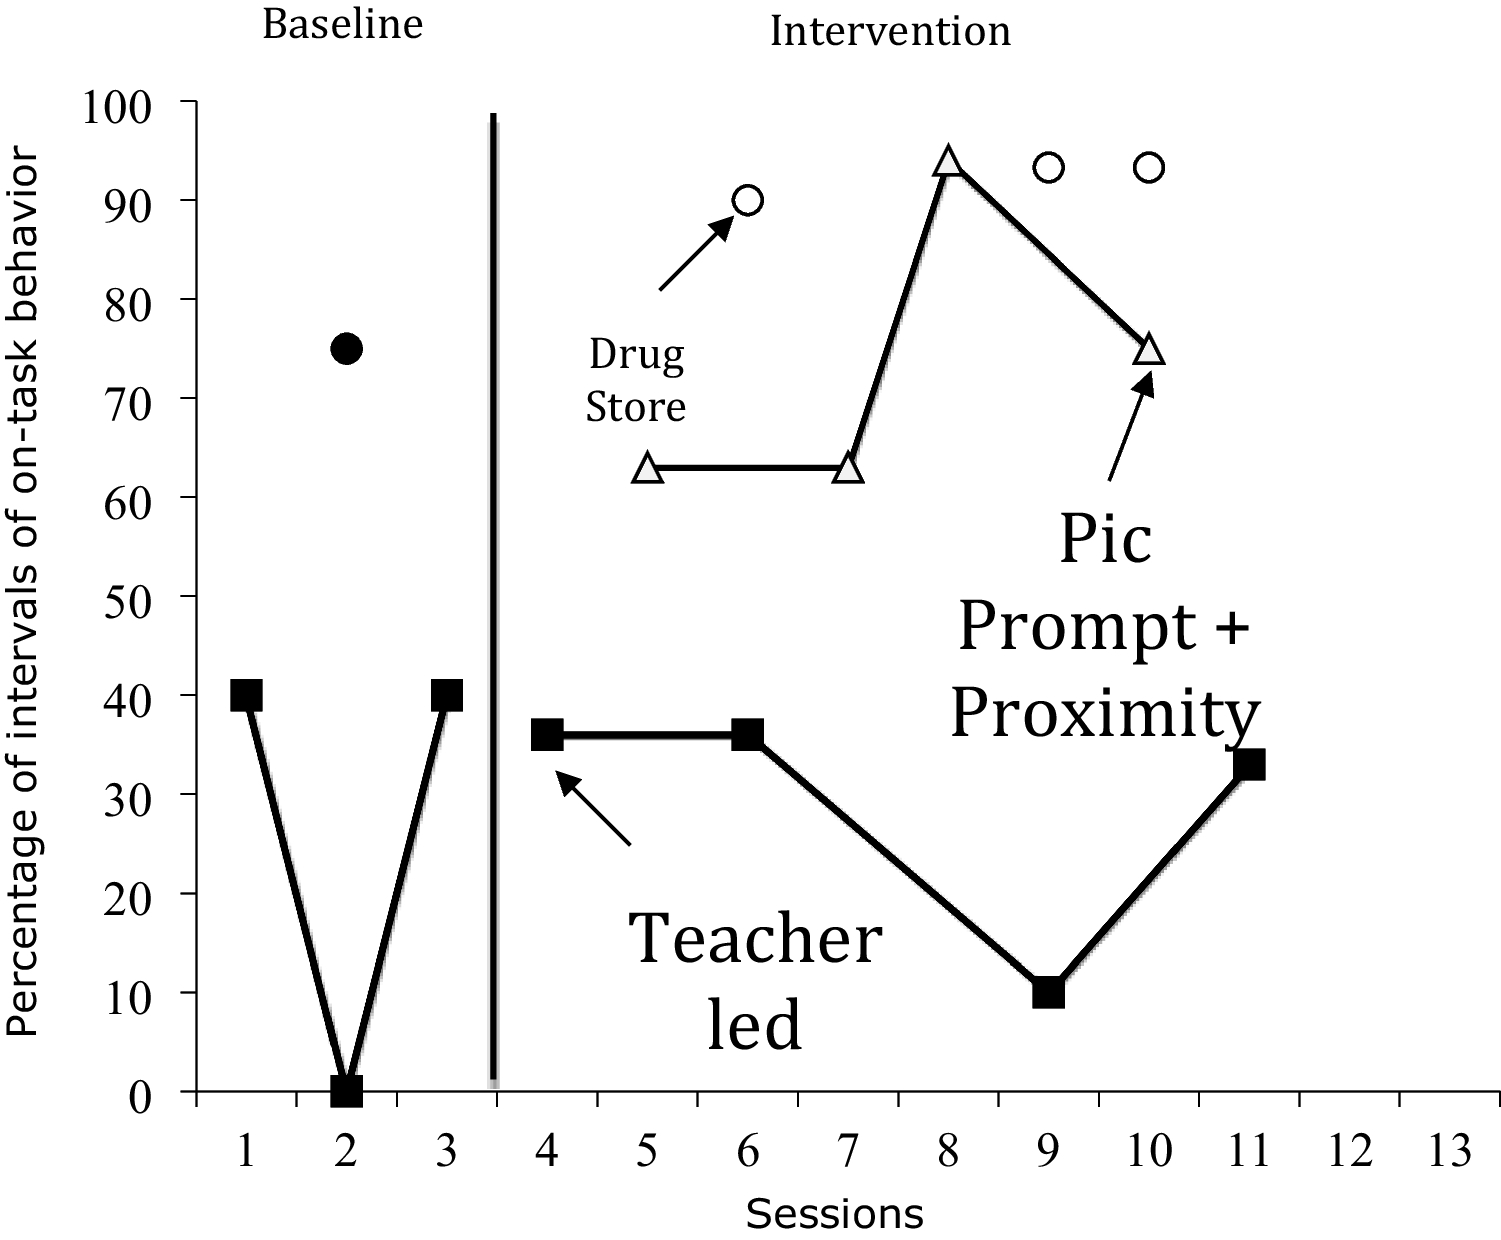 Implementing a Picture Prompt and Proximity Intervention in a Classroom with an Adult Learner: A Case Study